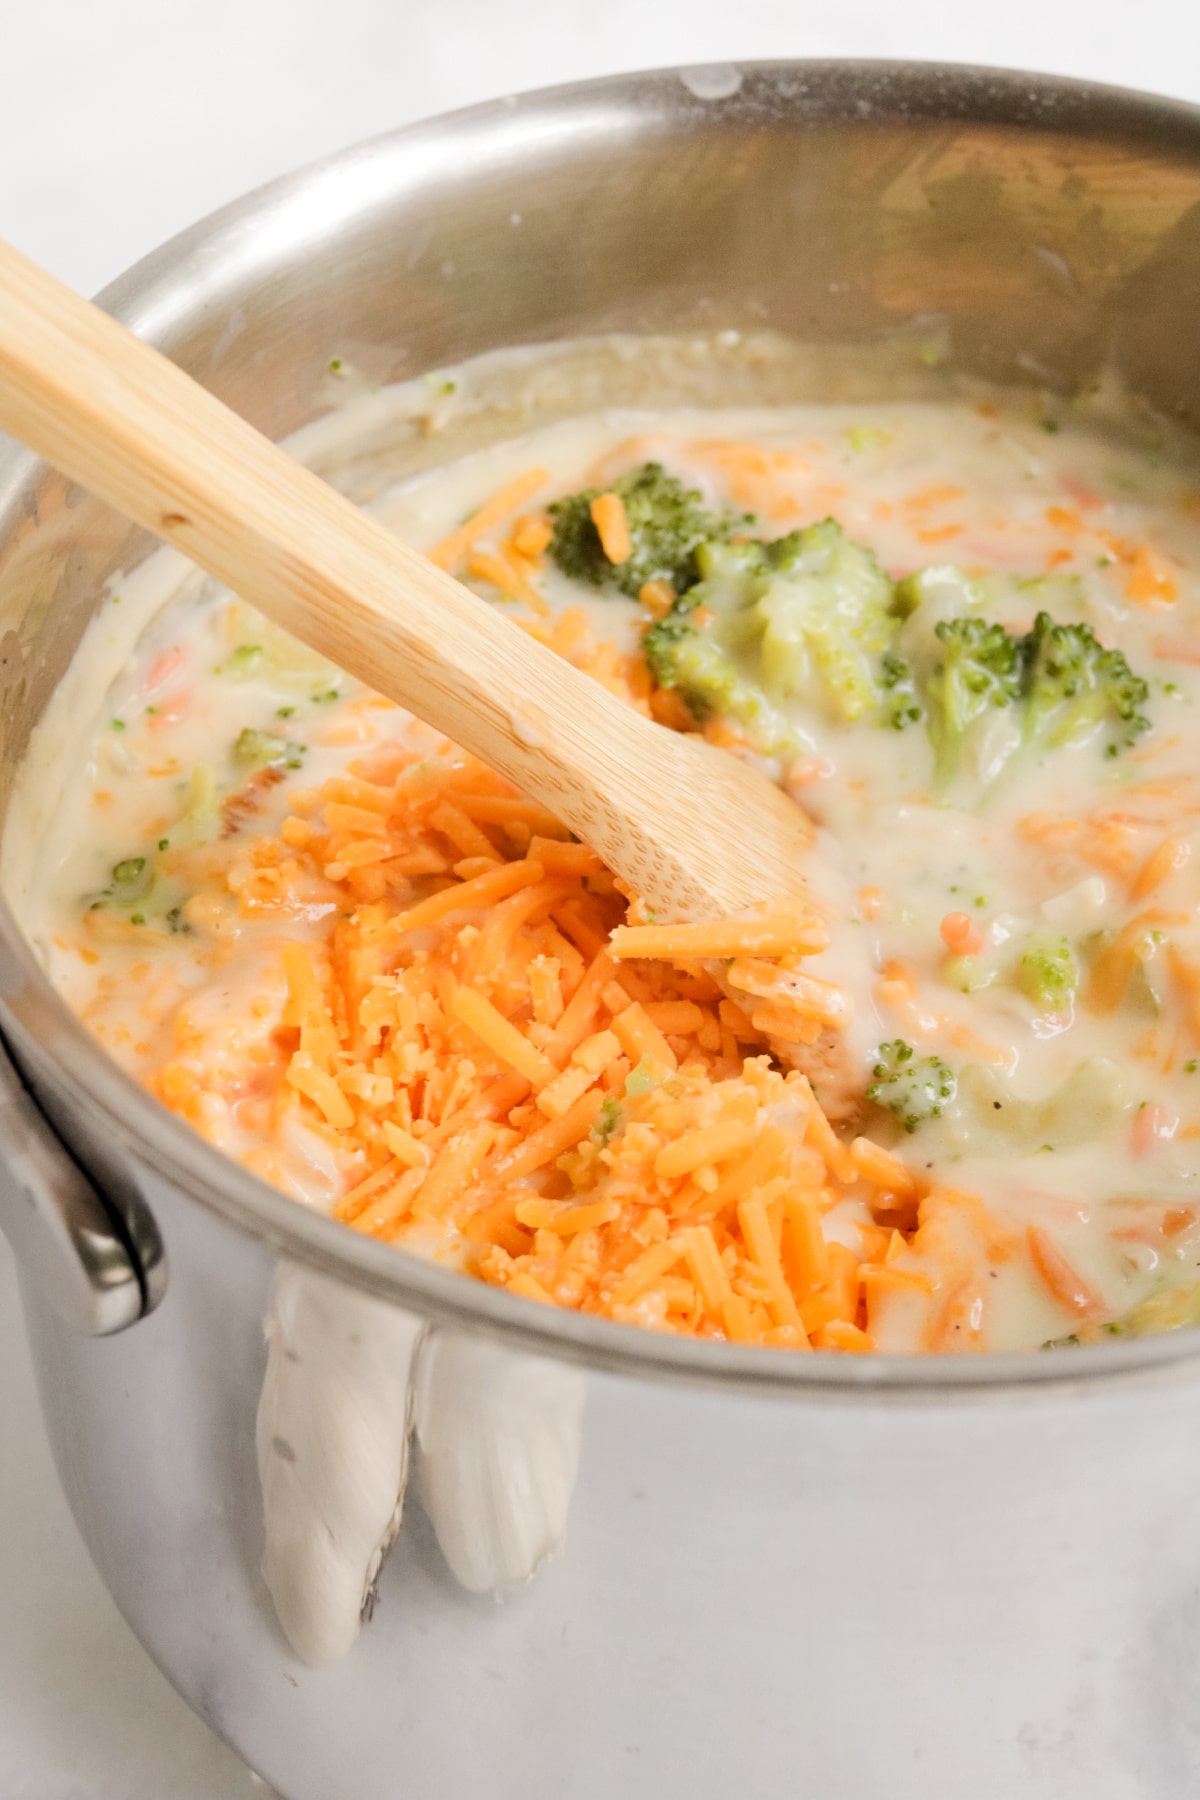 Close up of stainless steel pot of soup being made; cheese and broccoli are being stirred in with a wooden spoon.